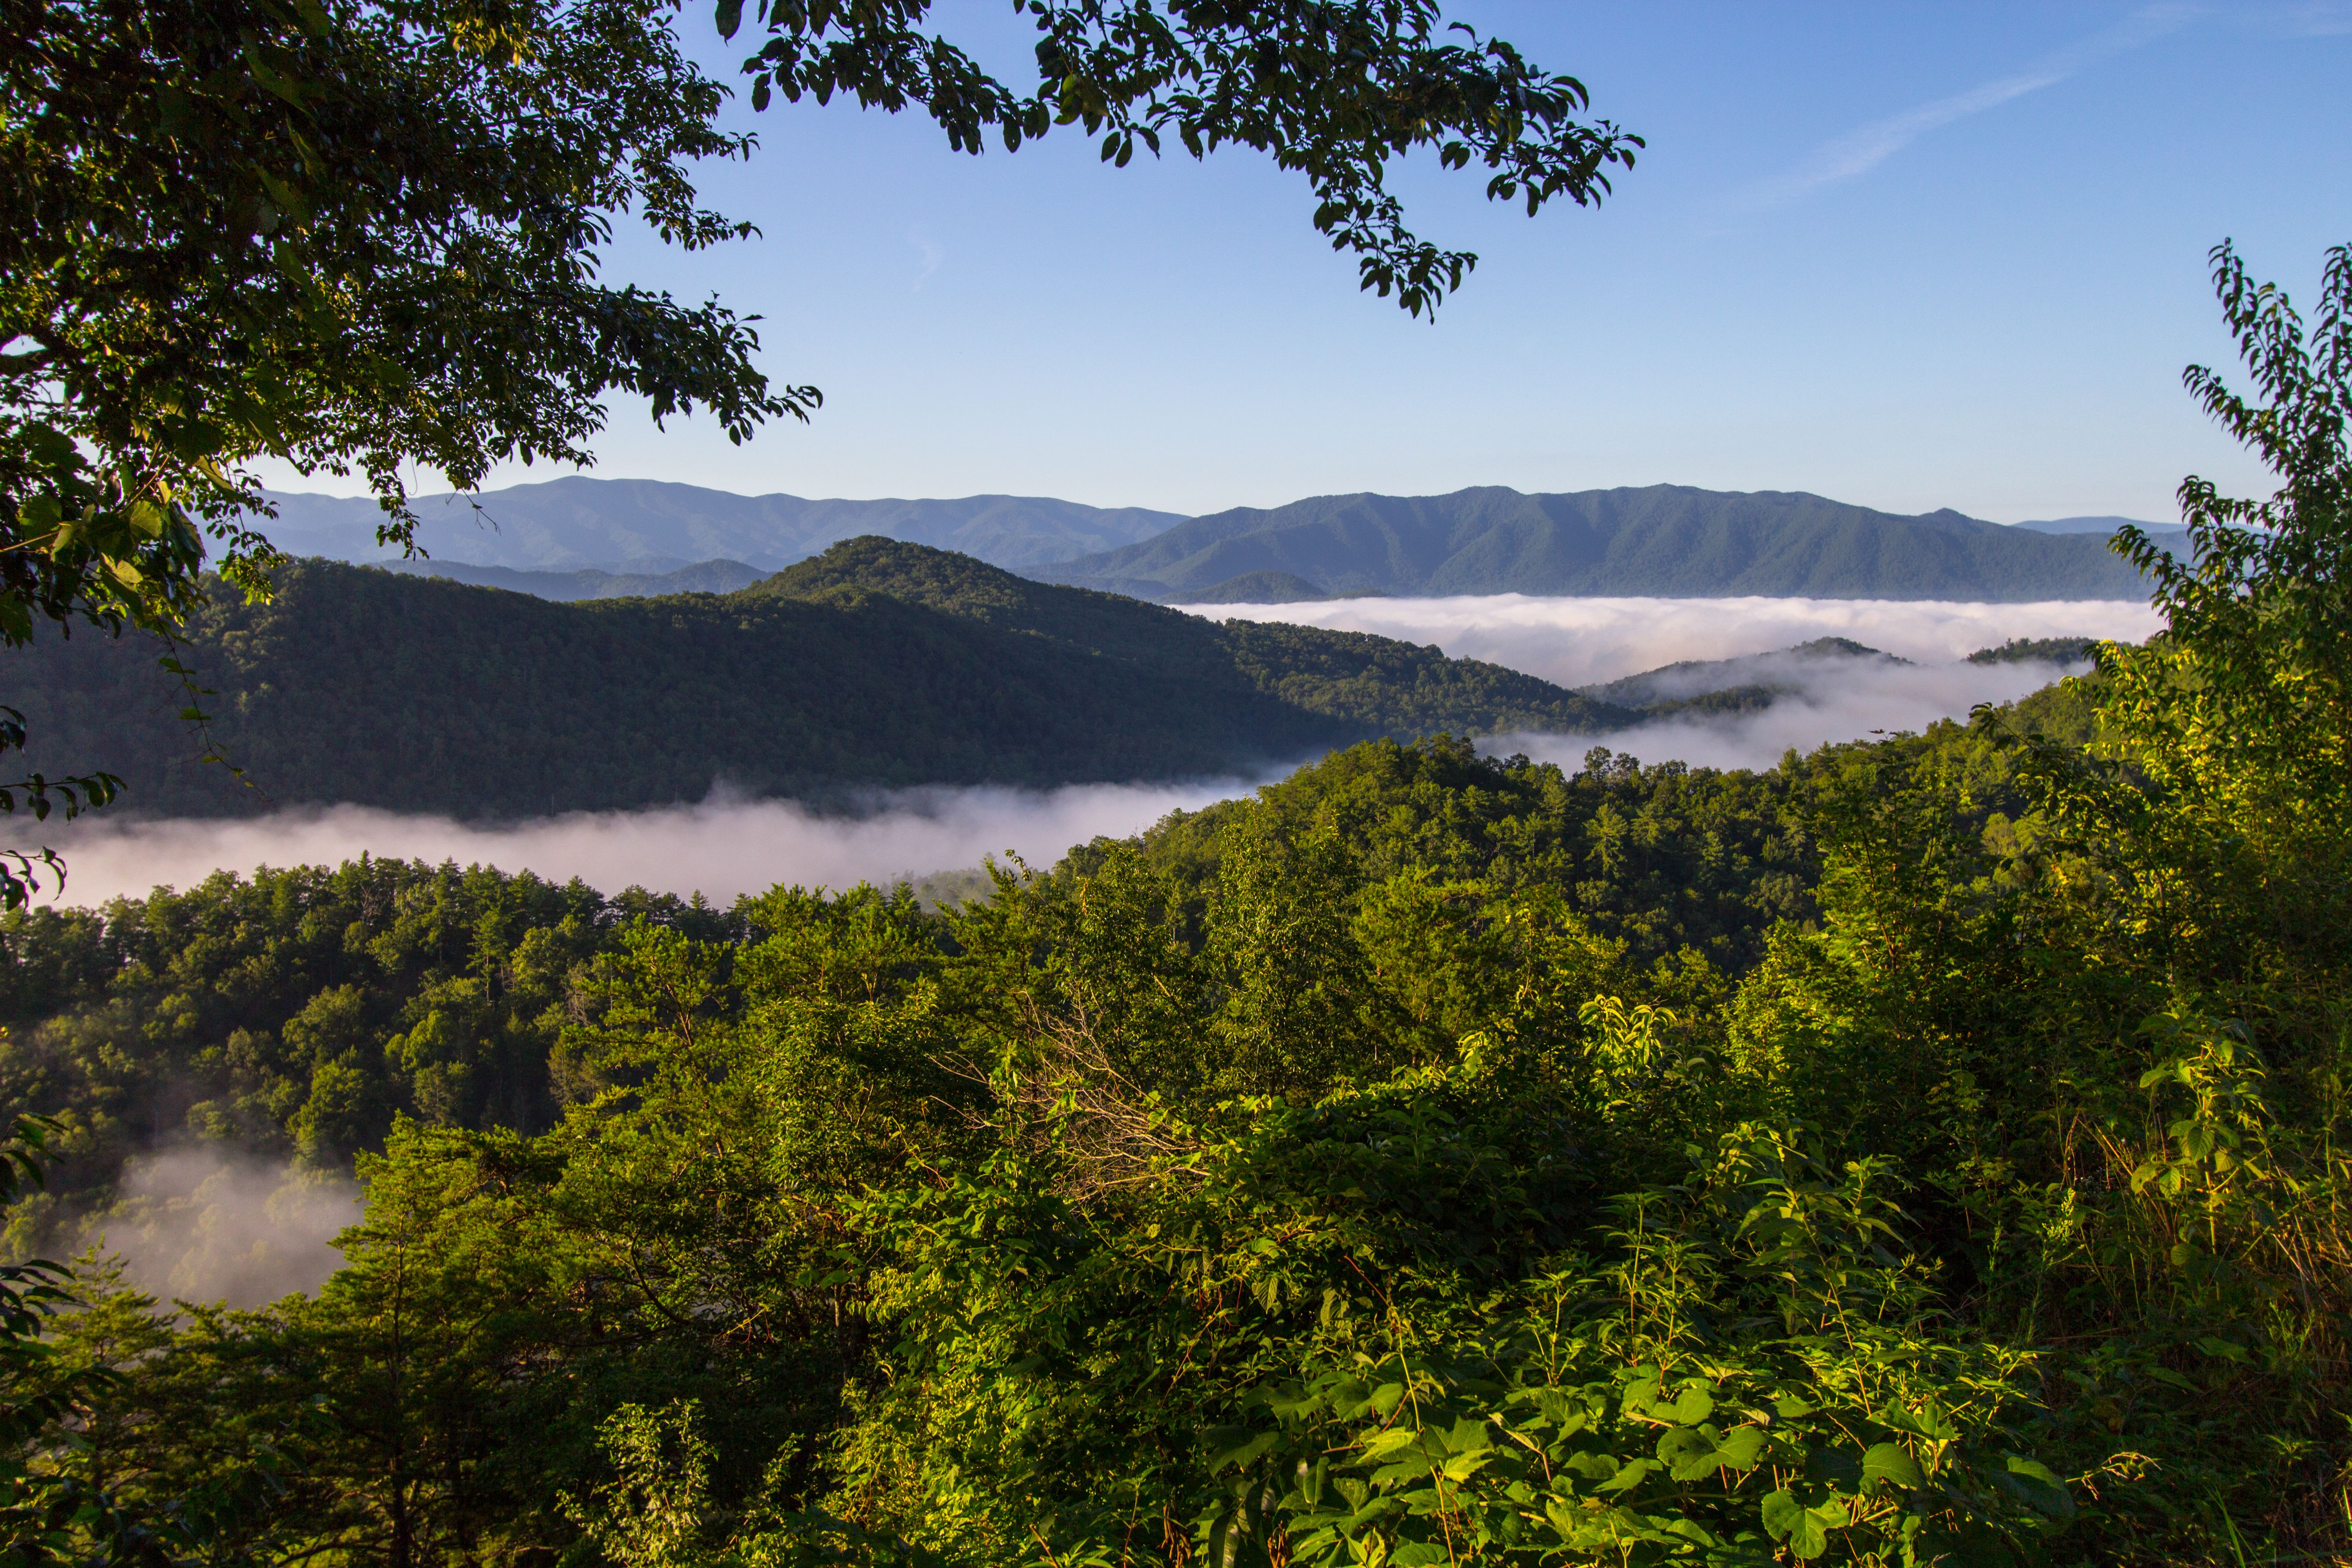 Mist in the valley of the Great Smoky Mountains National Park seen from Wears Valley, Tennessee